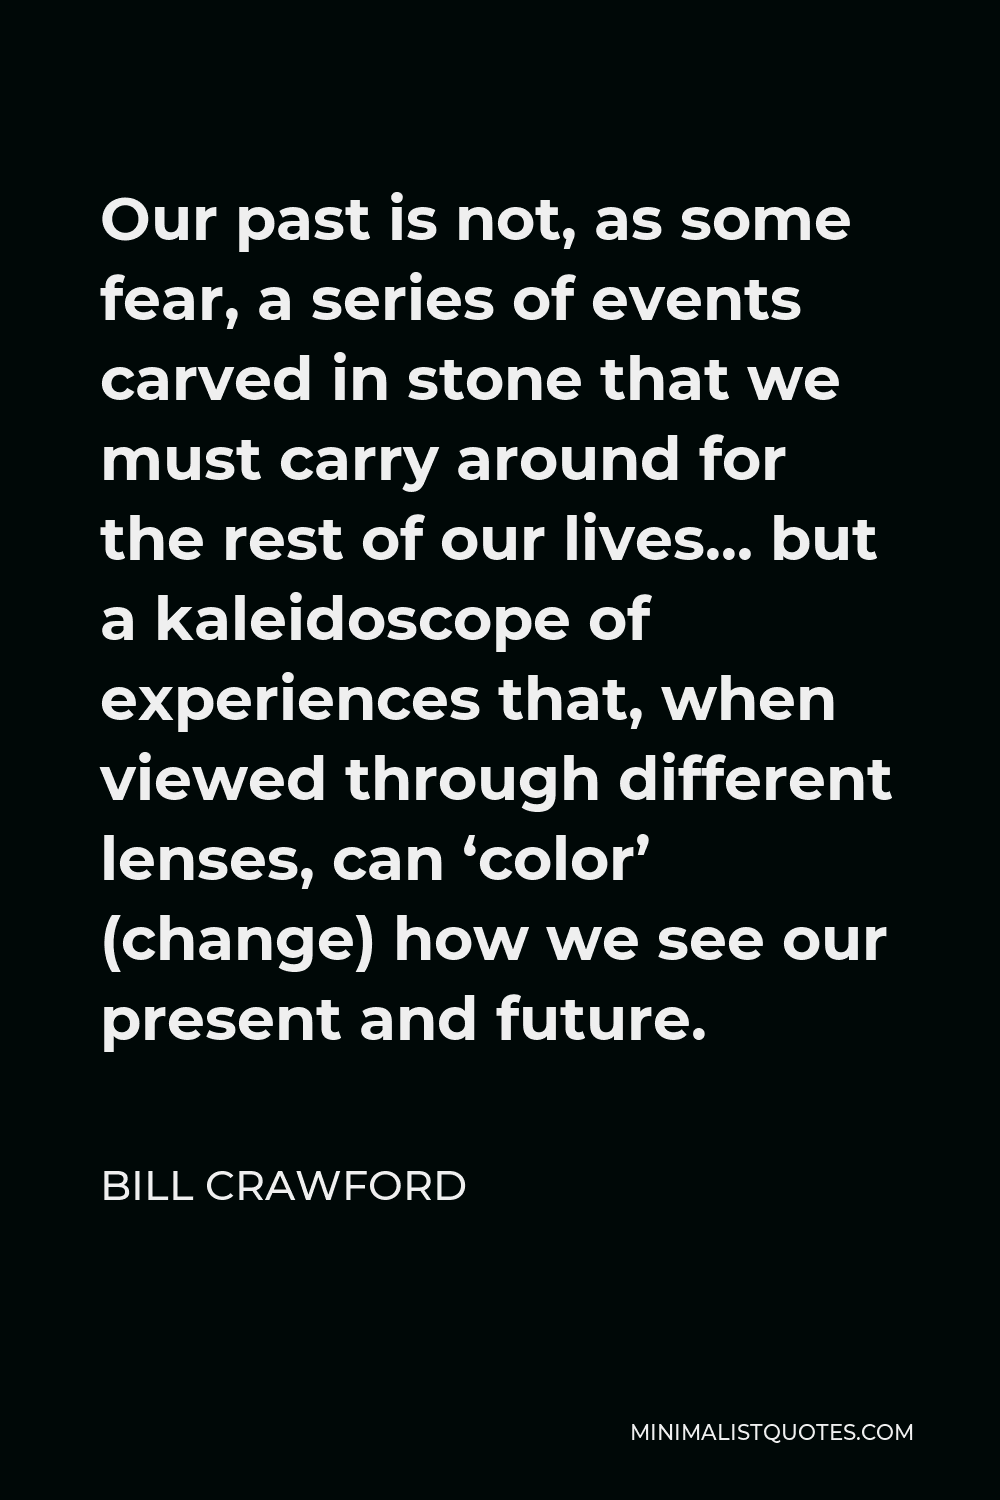 Bill Crawford Quote - Our past is not, as some fear, a series of events carved in stone that we must carry around for the rest of our lives… but a kaleidoscope of experiences that, when viewed through different lenses, can ‘color’ (change) how we see our present and future.